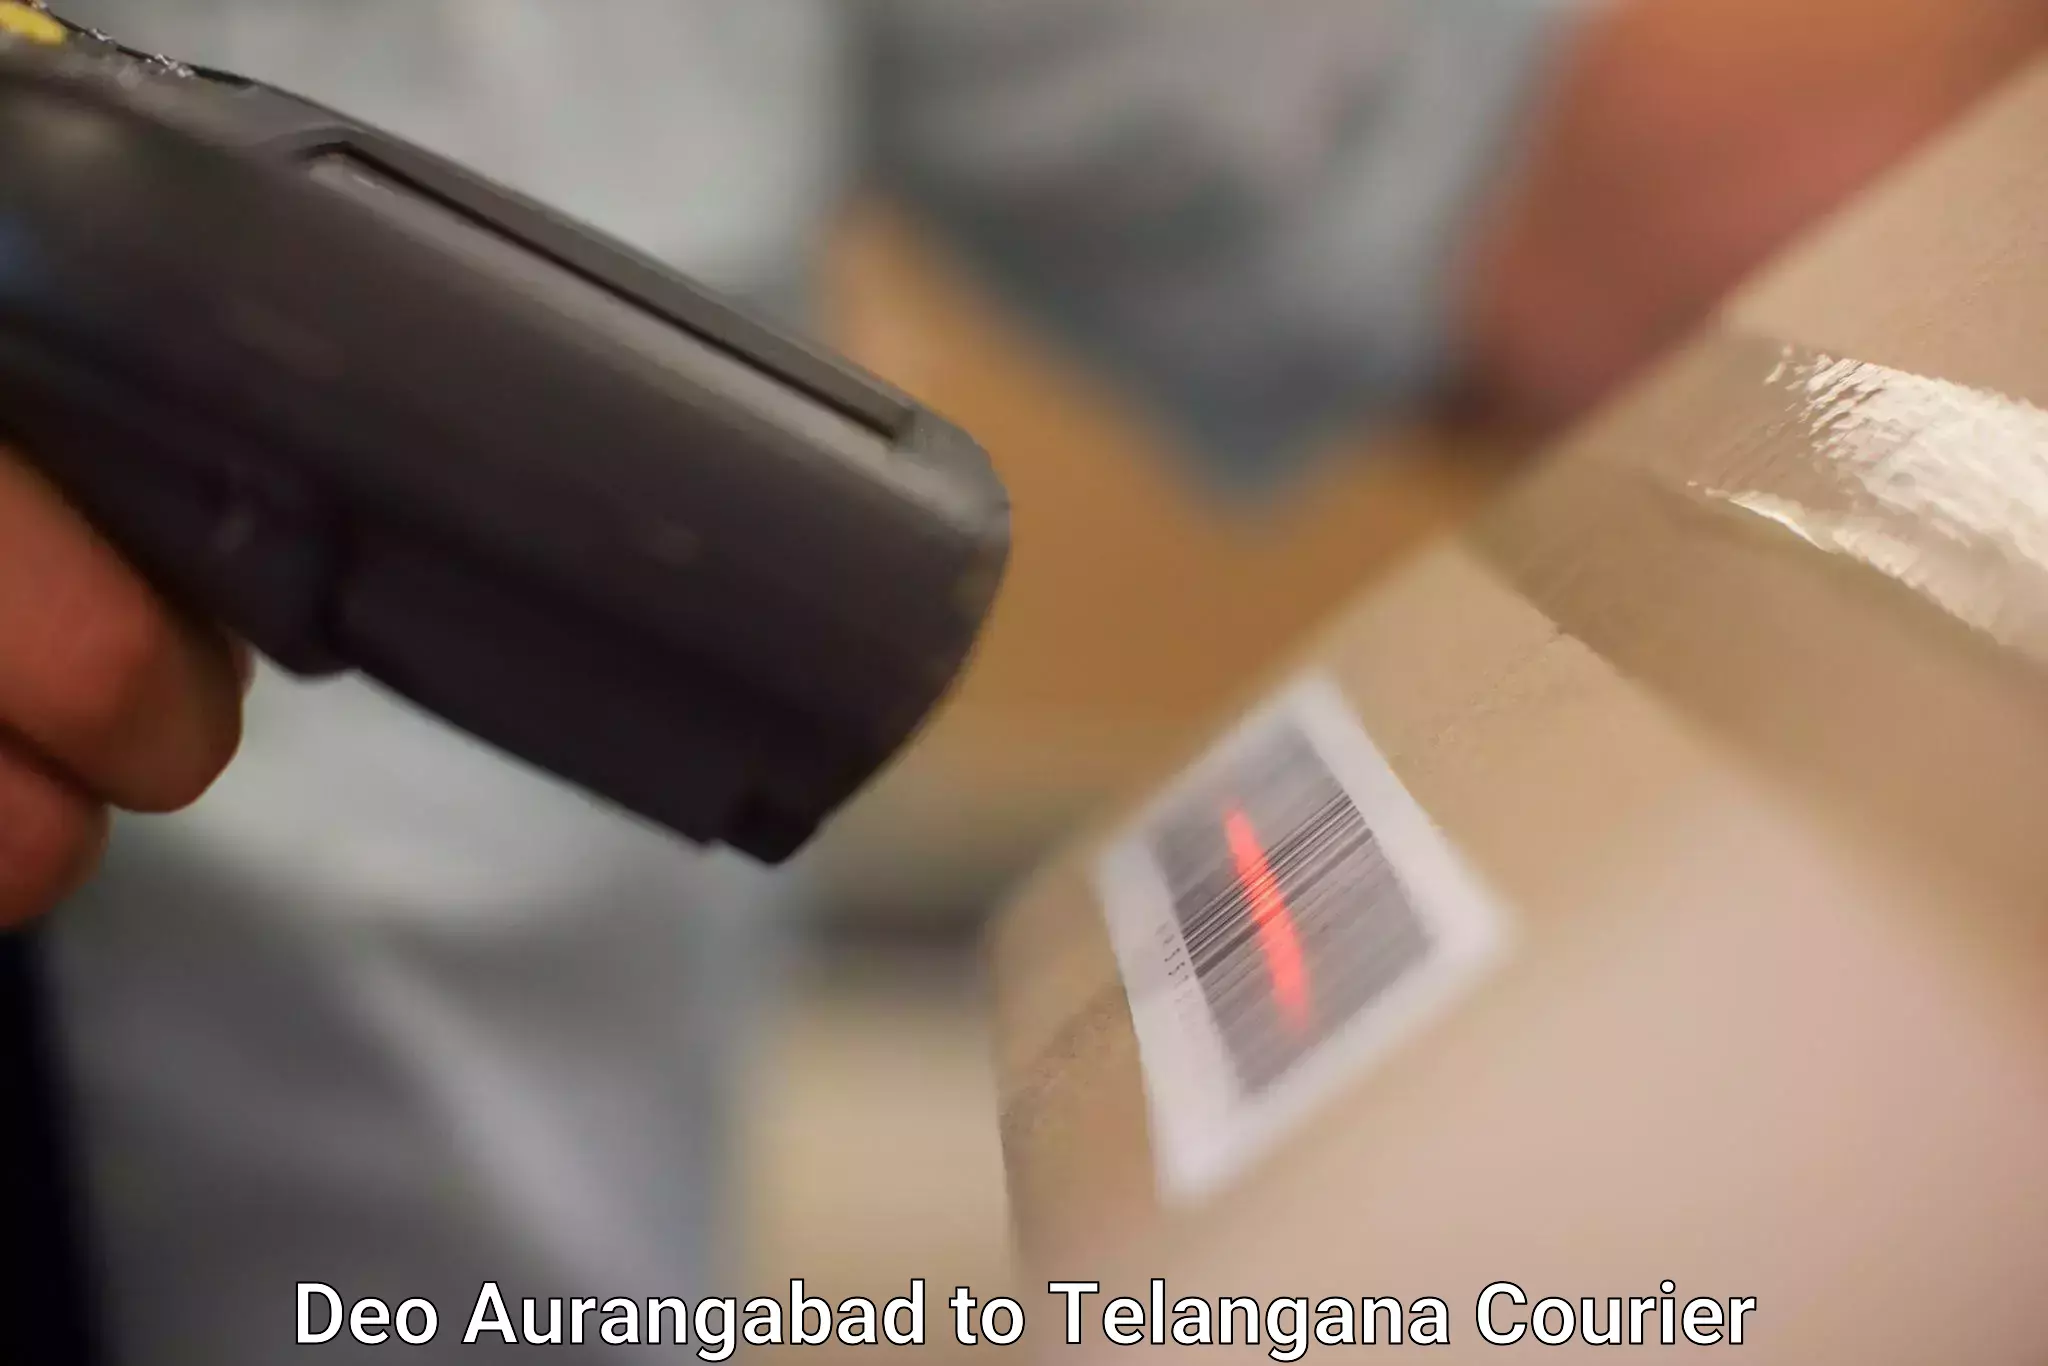 Same-day delivery options Deo Aurangabad to Telangana